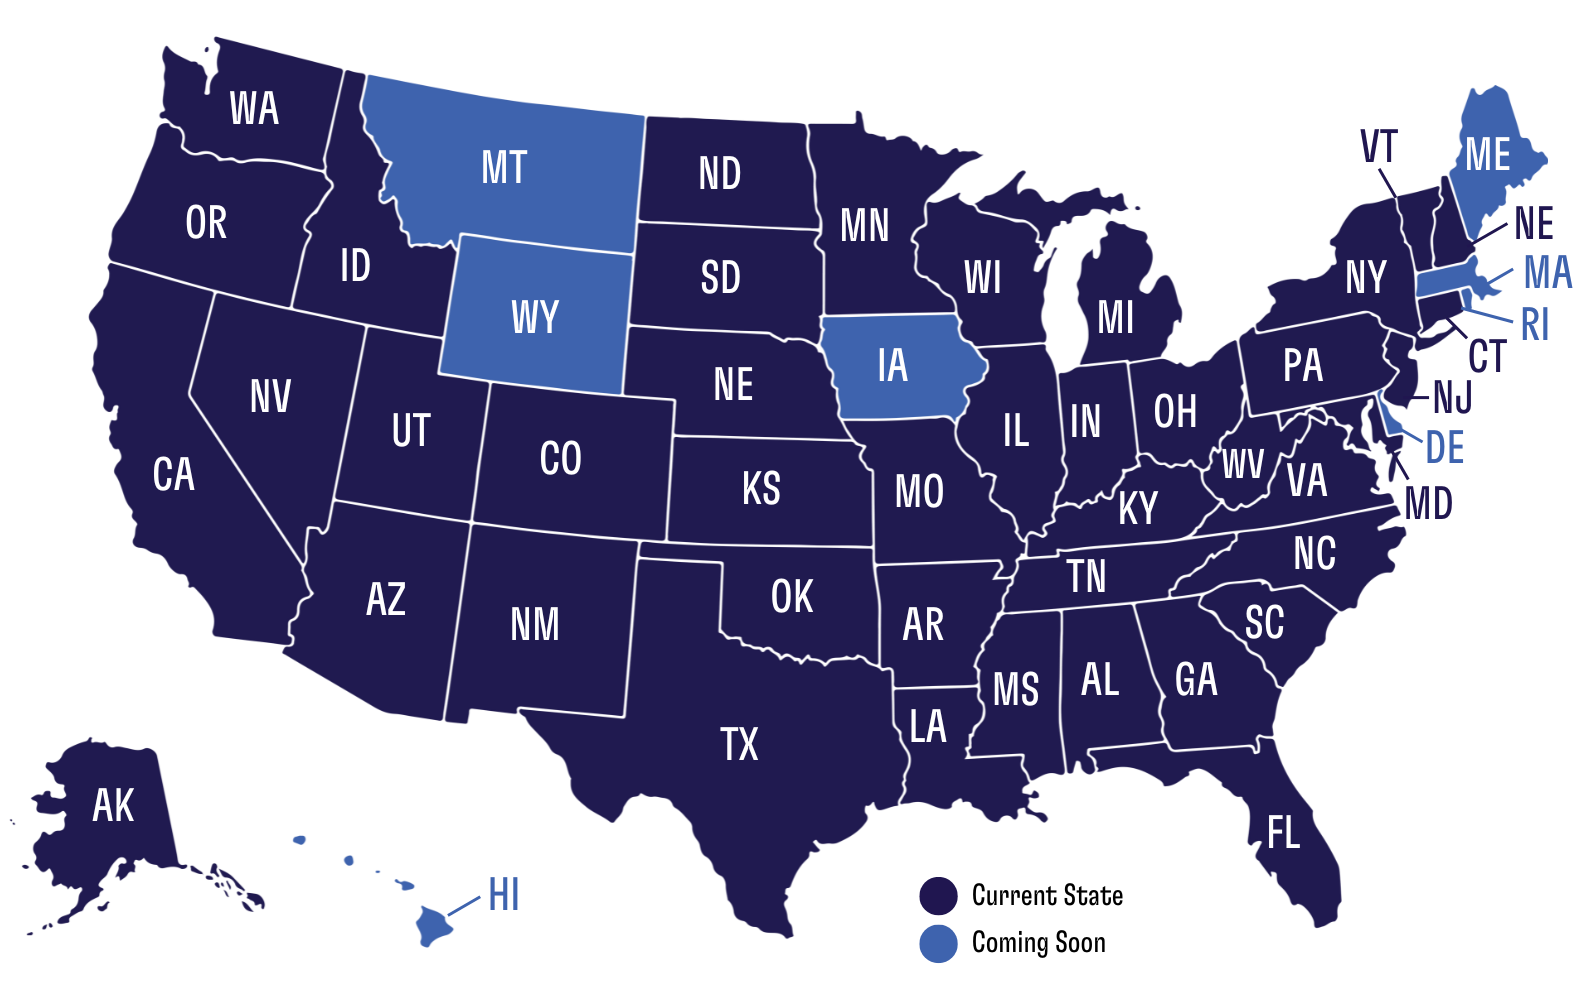 map of the united states showing which states MB2 is in